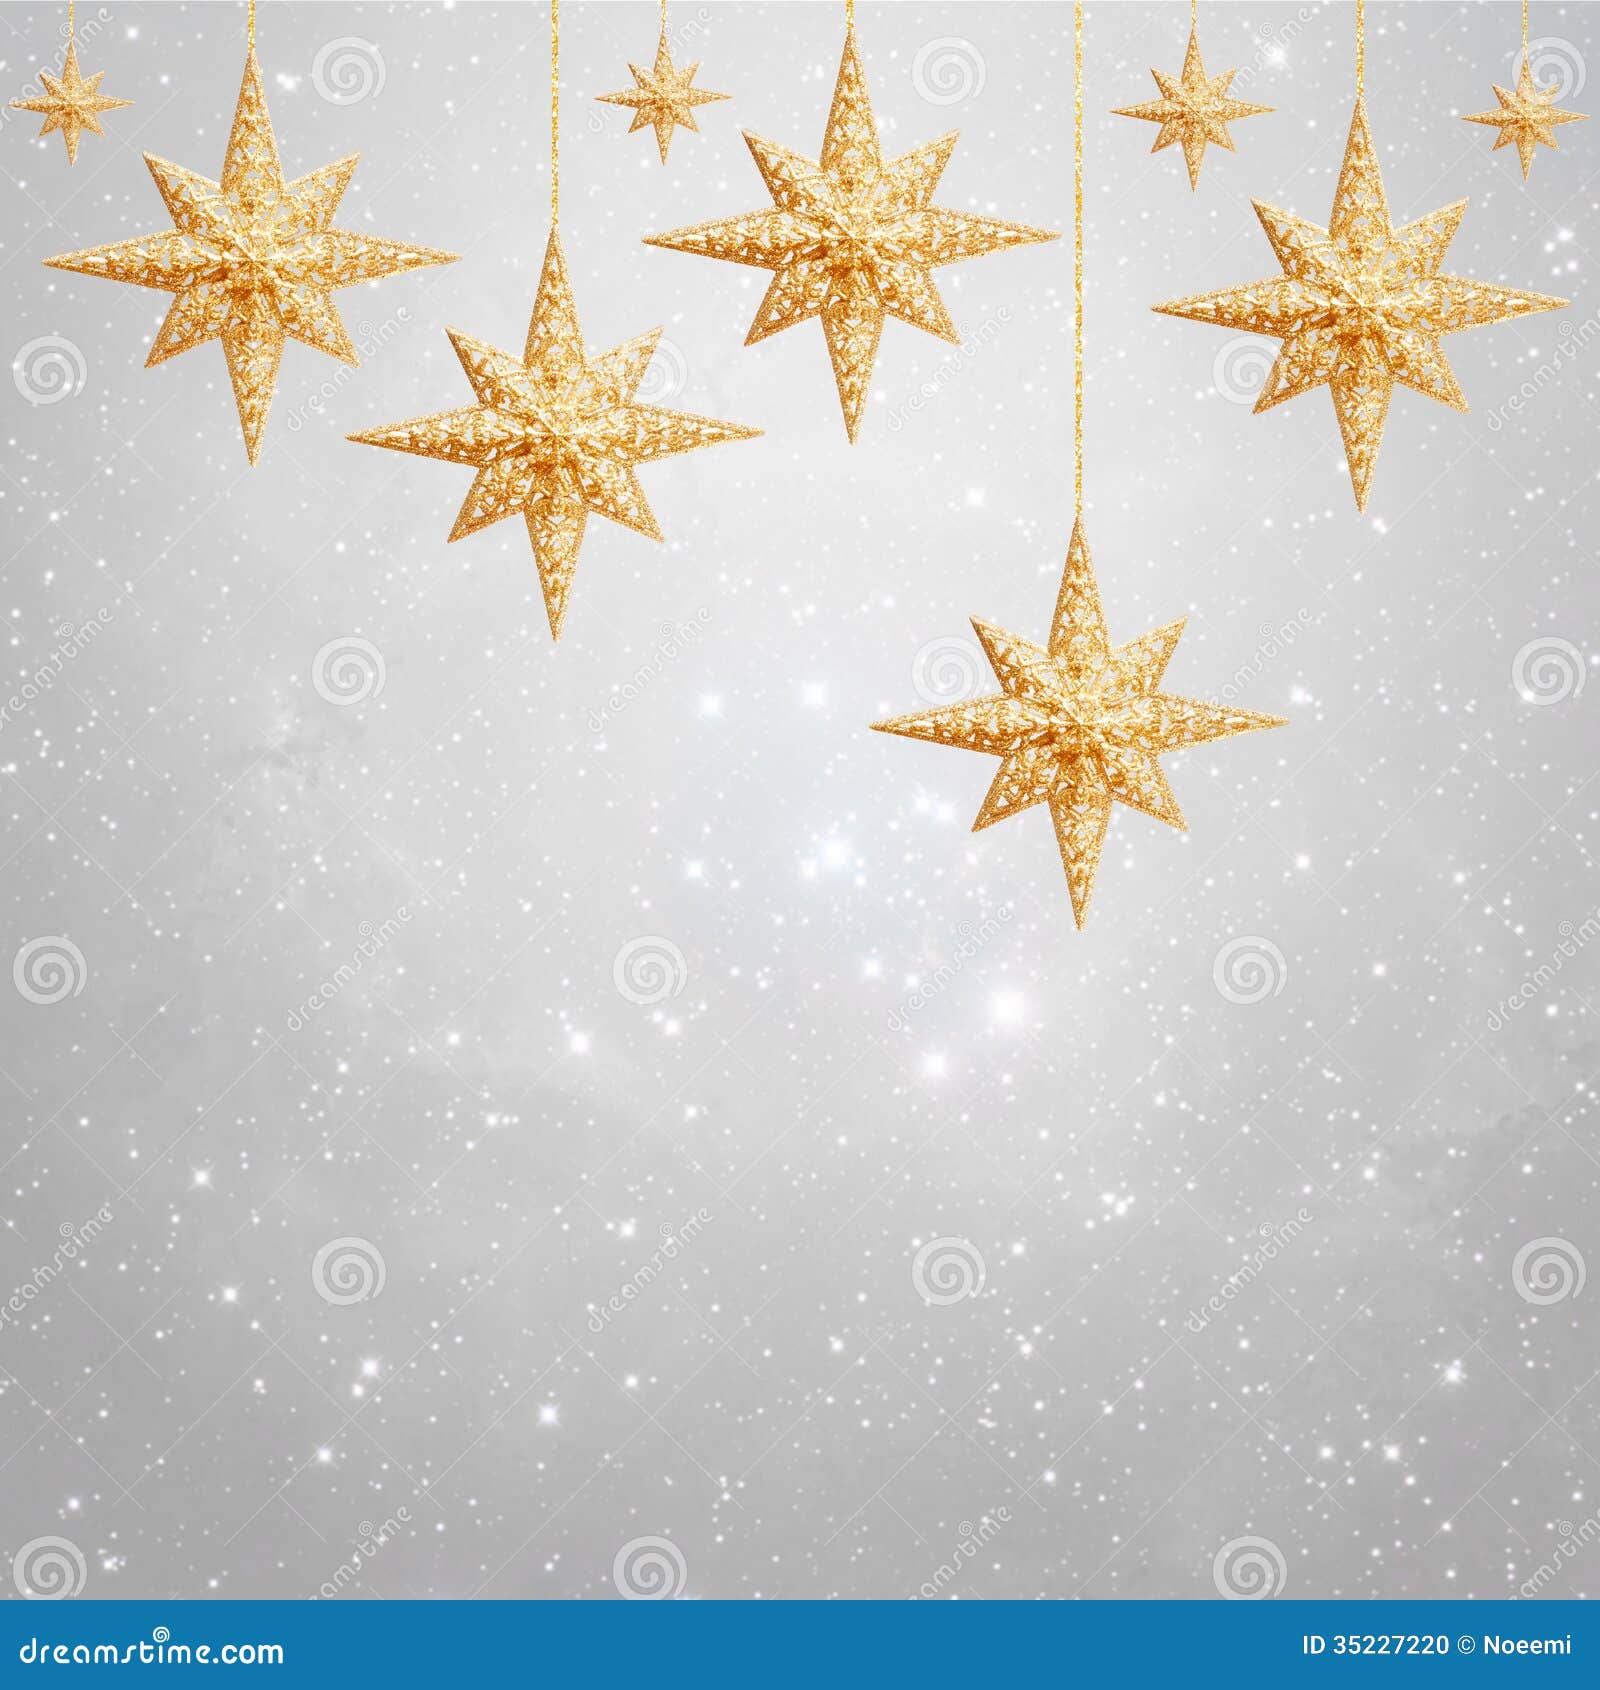 Christmas background with gold streamers and star Vector Image